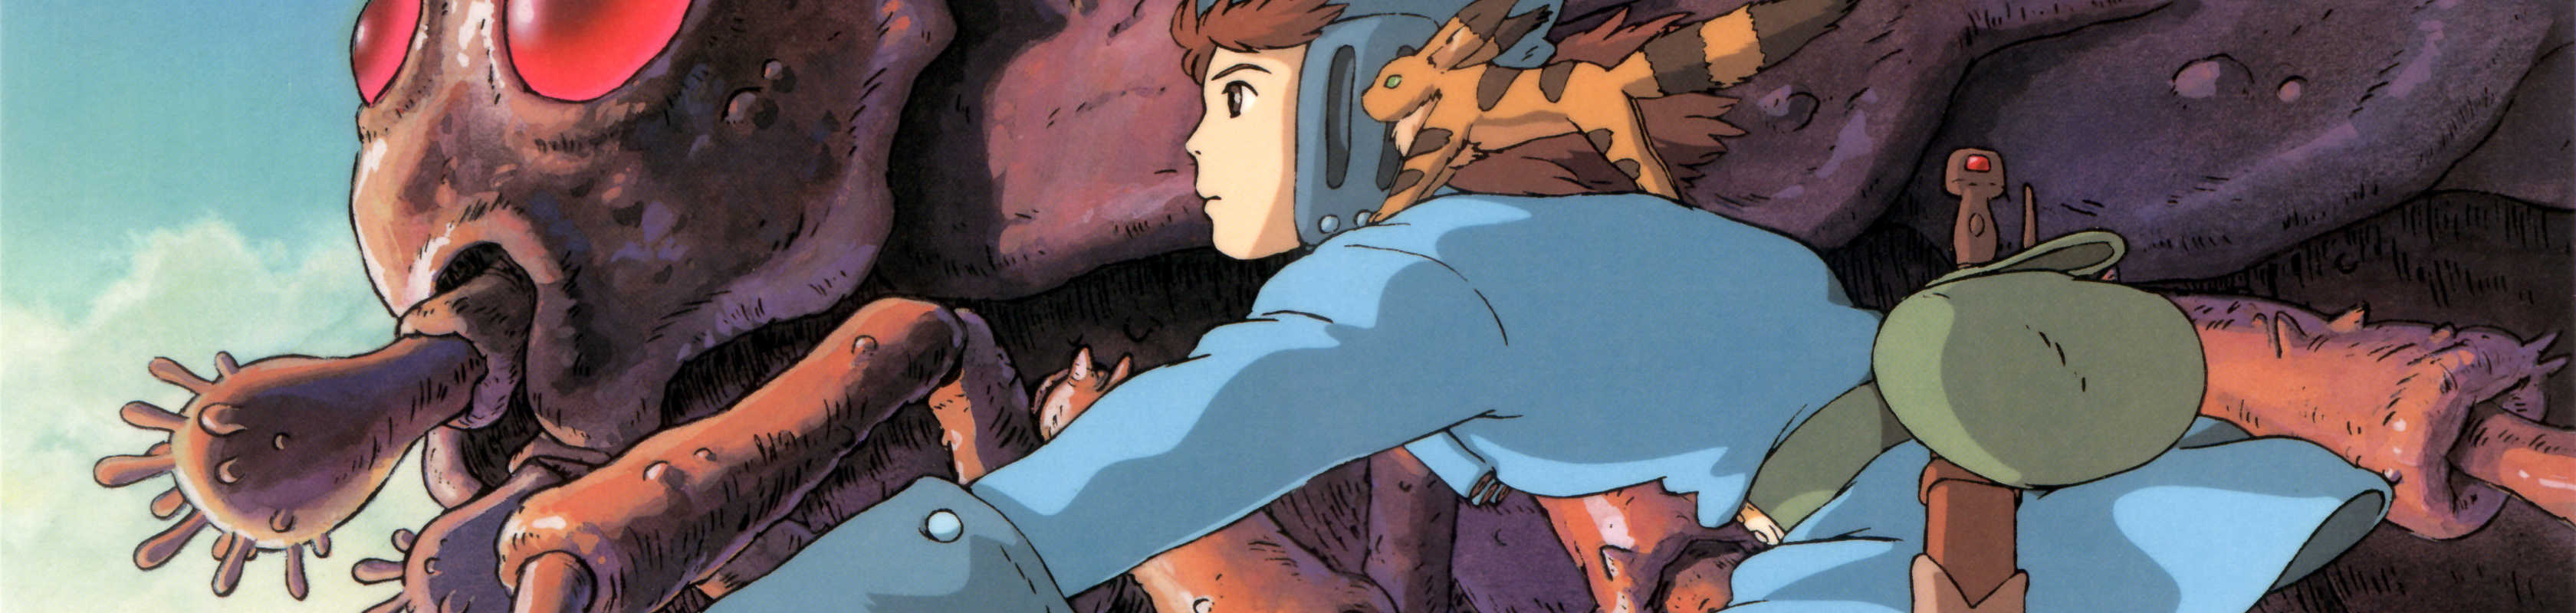 Nausicaä of the Valley of the Wind cover